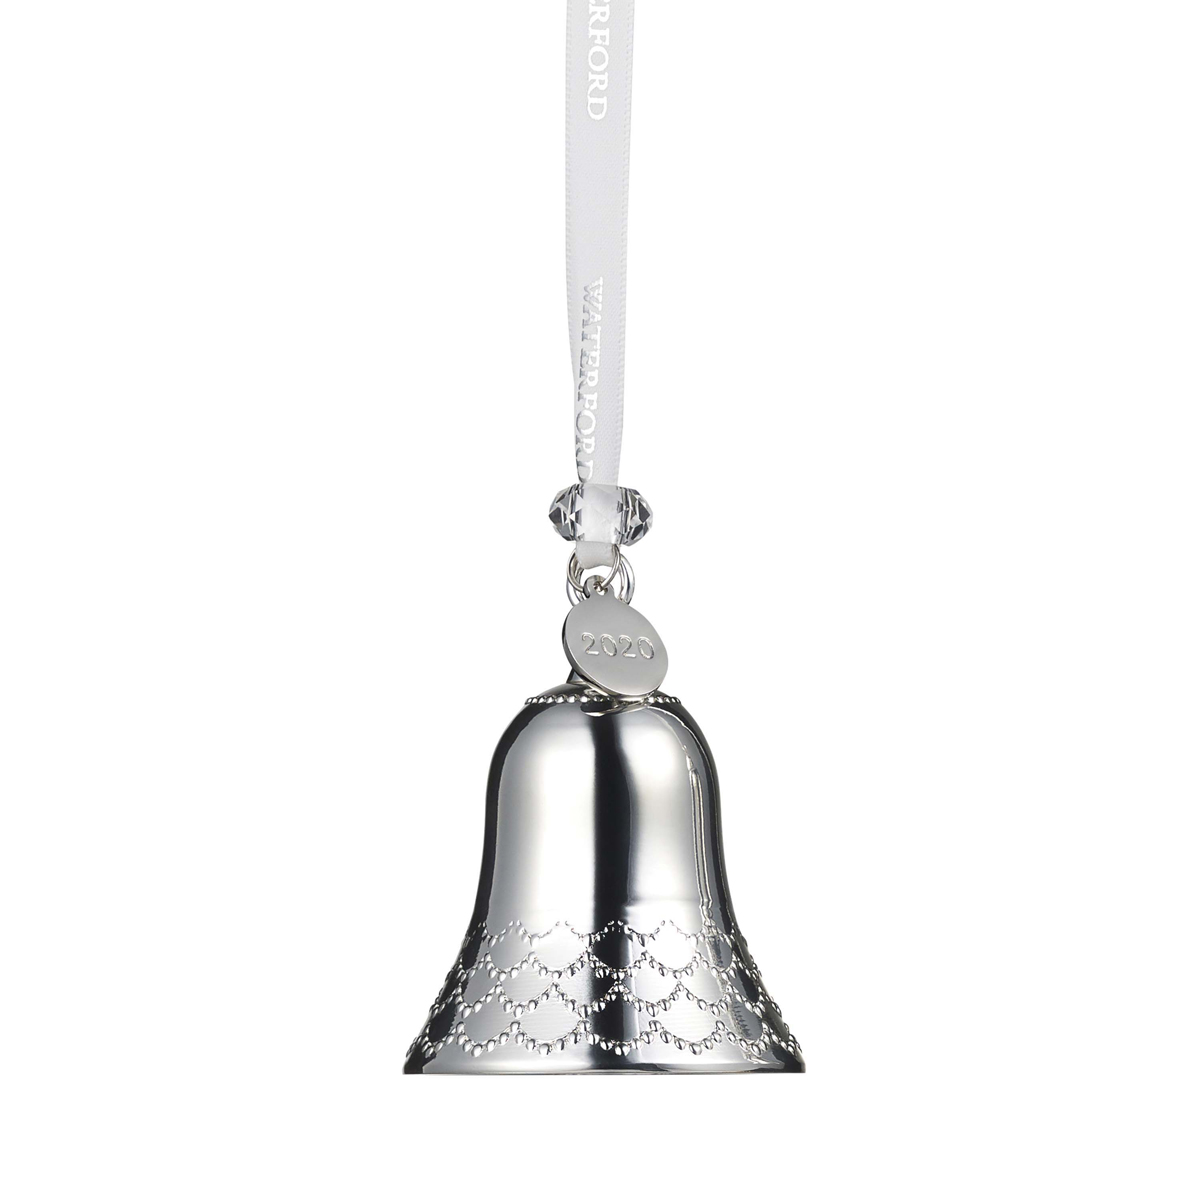 Waterford 2020 Silver Bell Ornament